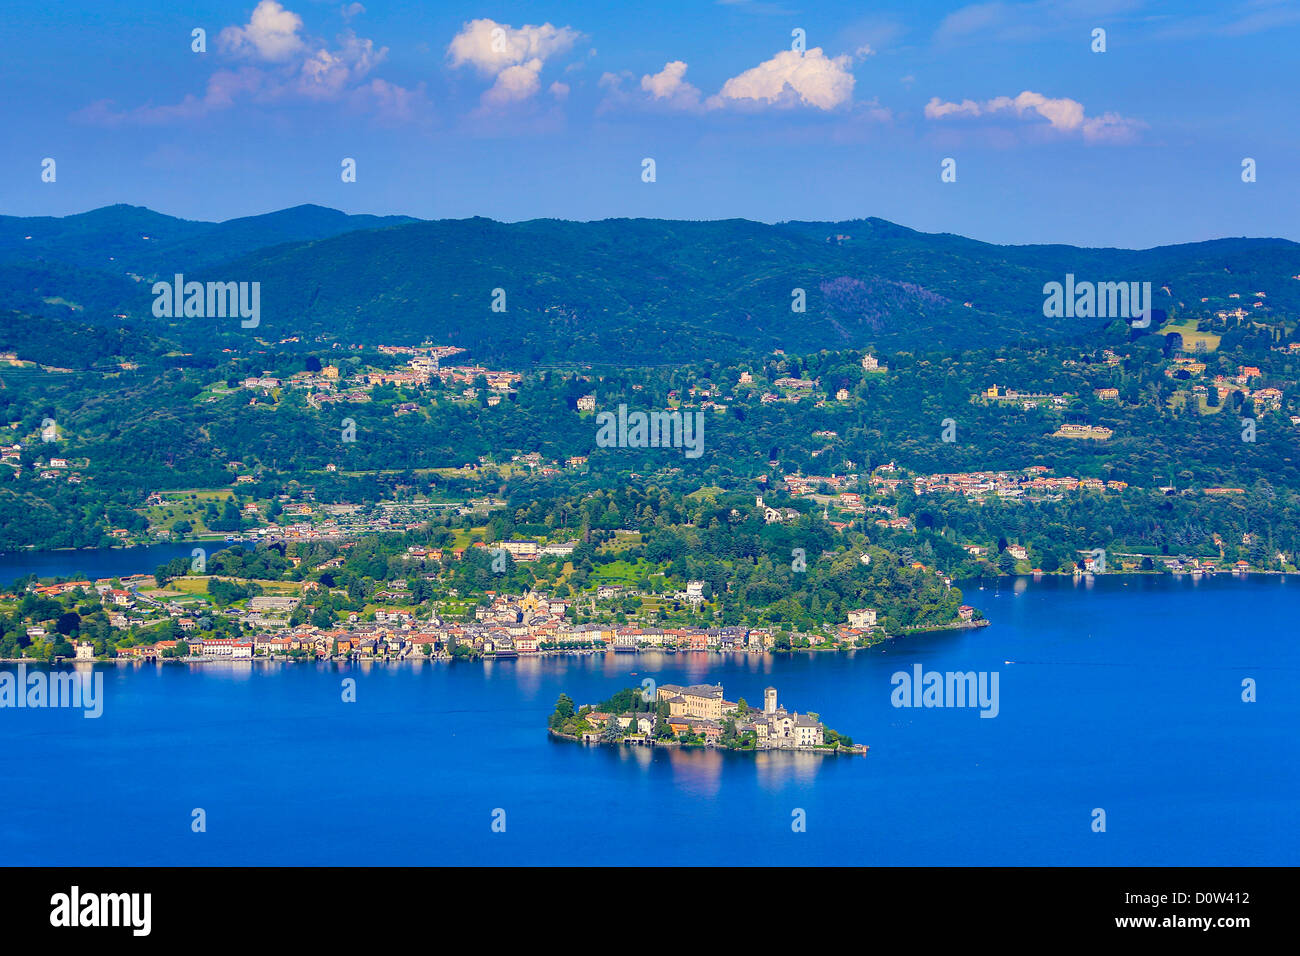 Italy, Europe, travel, Orta, Lake, San Gulio, Island, Piedmont, roofs, forest, tourism, town, landscape Stock Photo